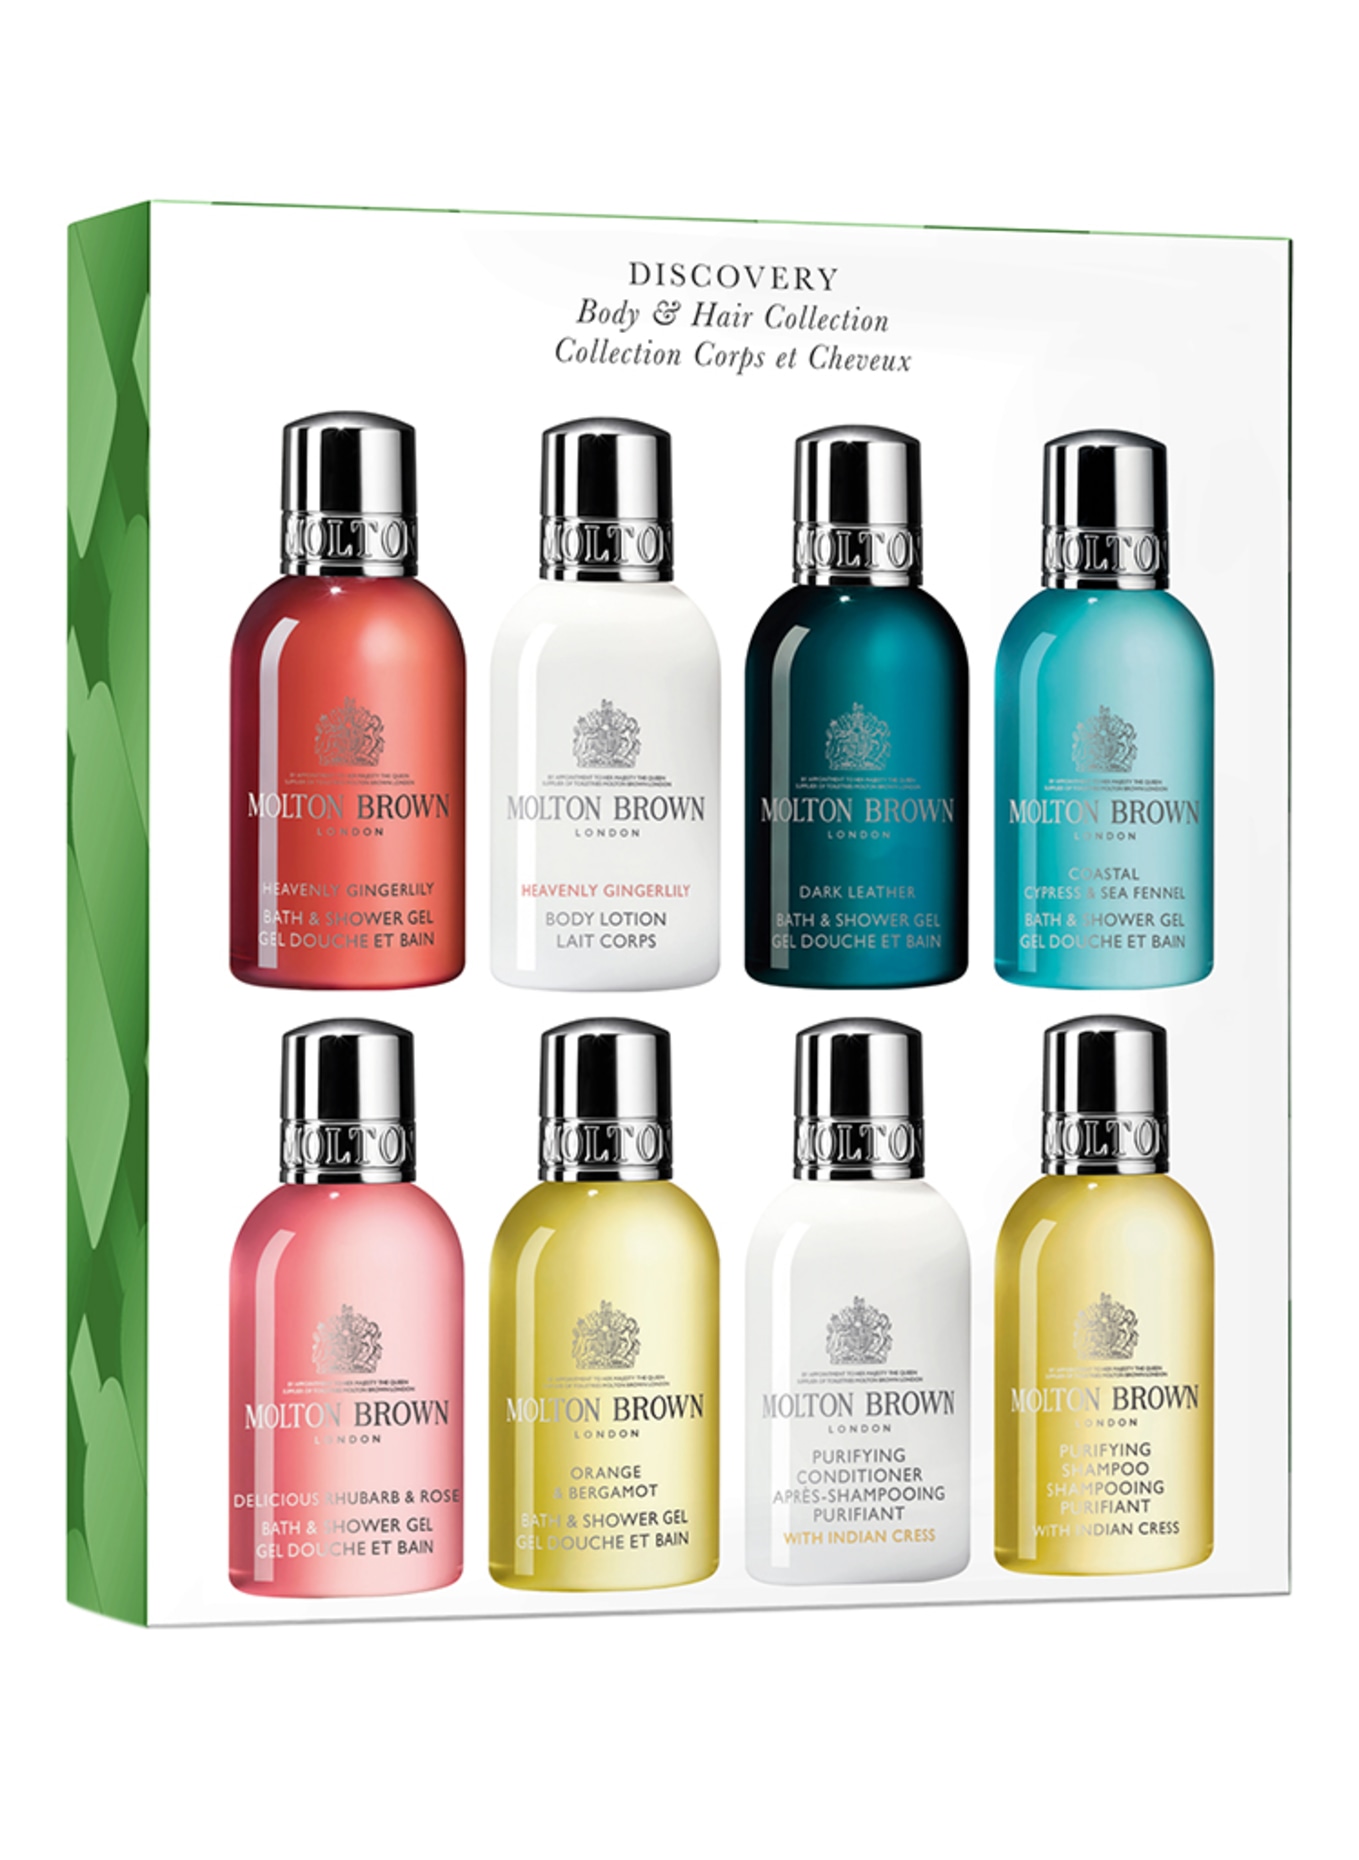 MOLTON BROWN DISCOVERY BODY & HAIR COLLECTION (Obrazek 1)